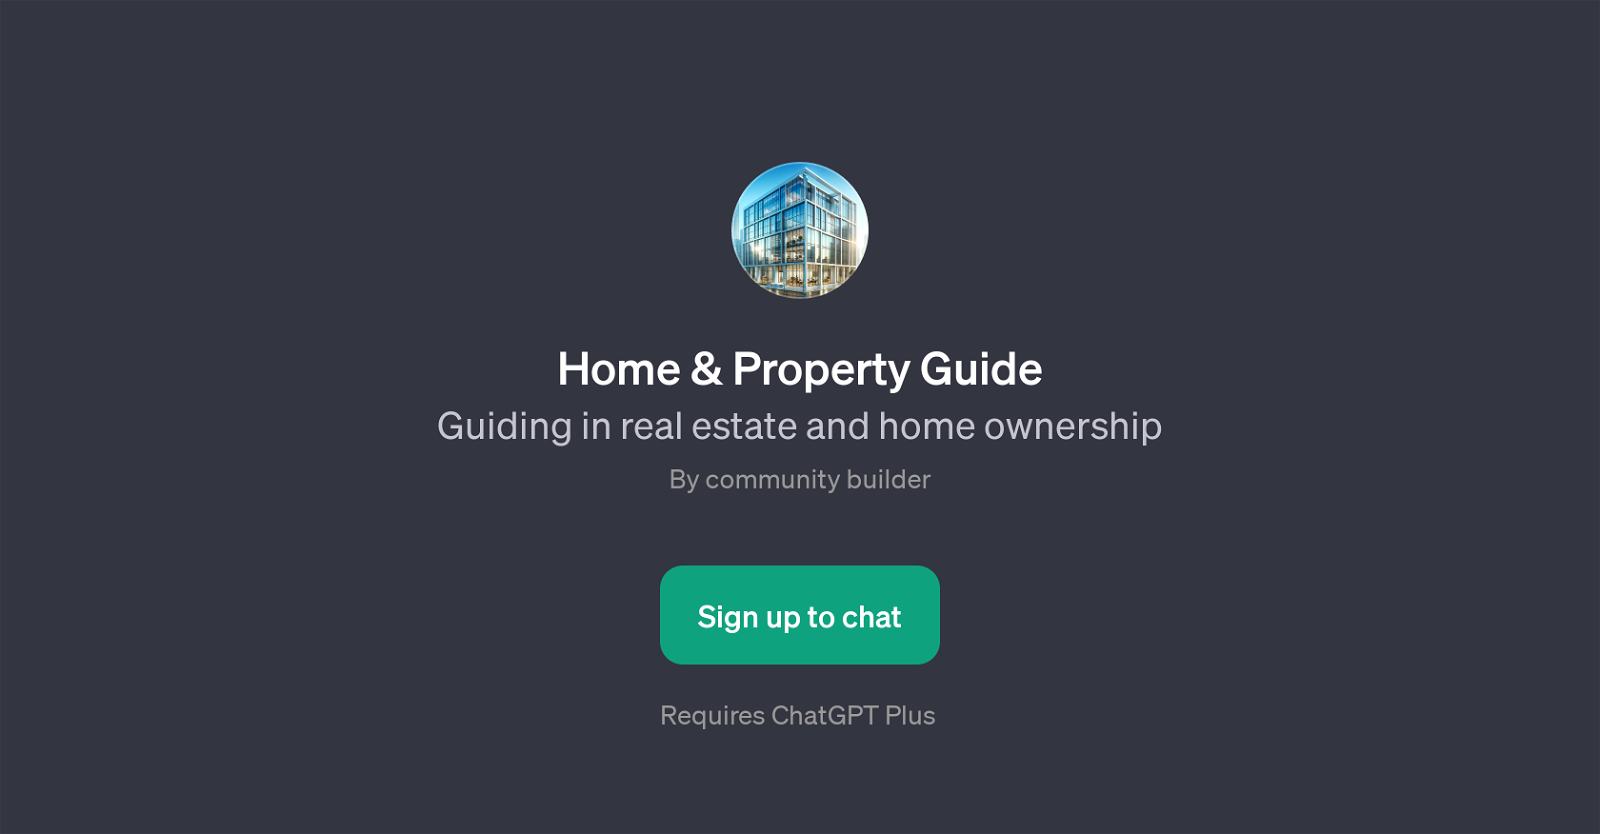 Home & Property Guide website